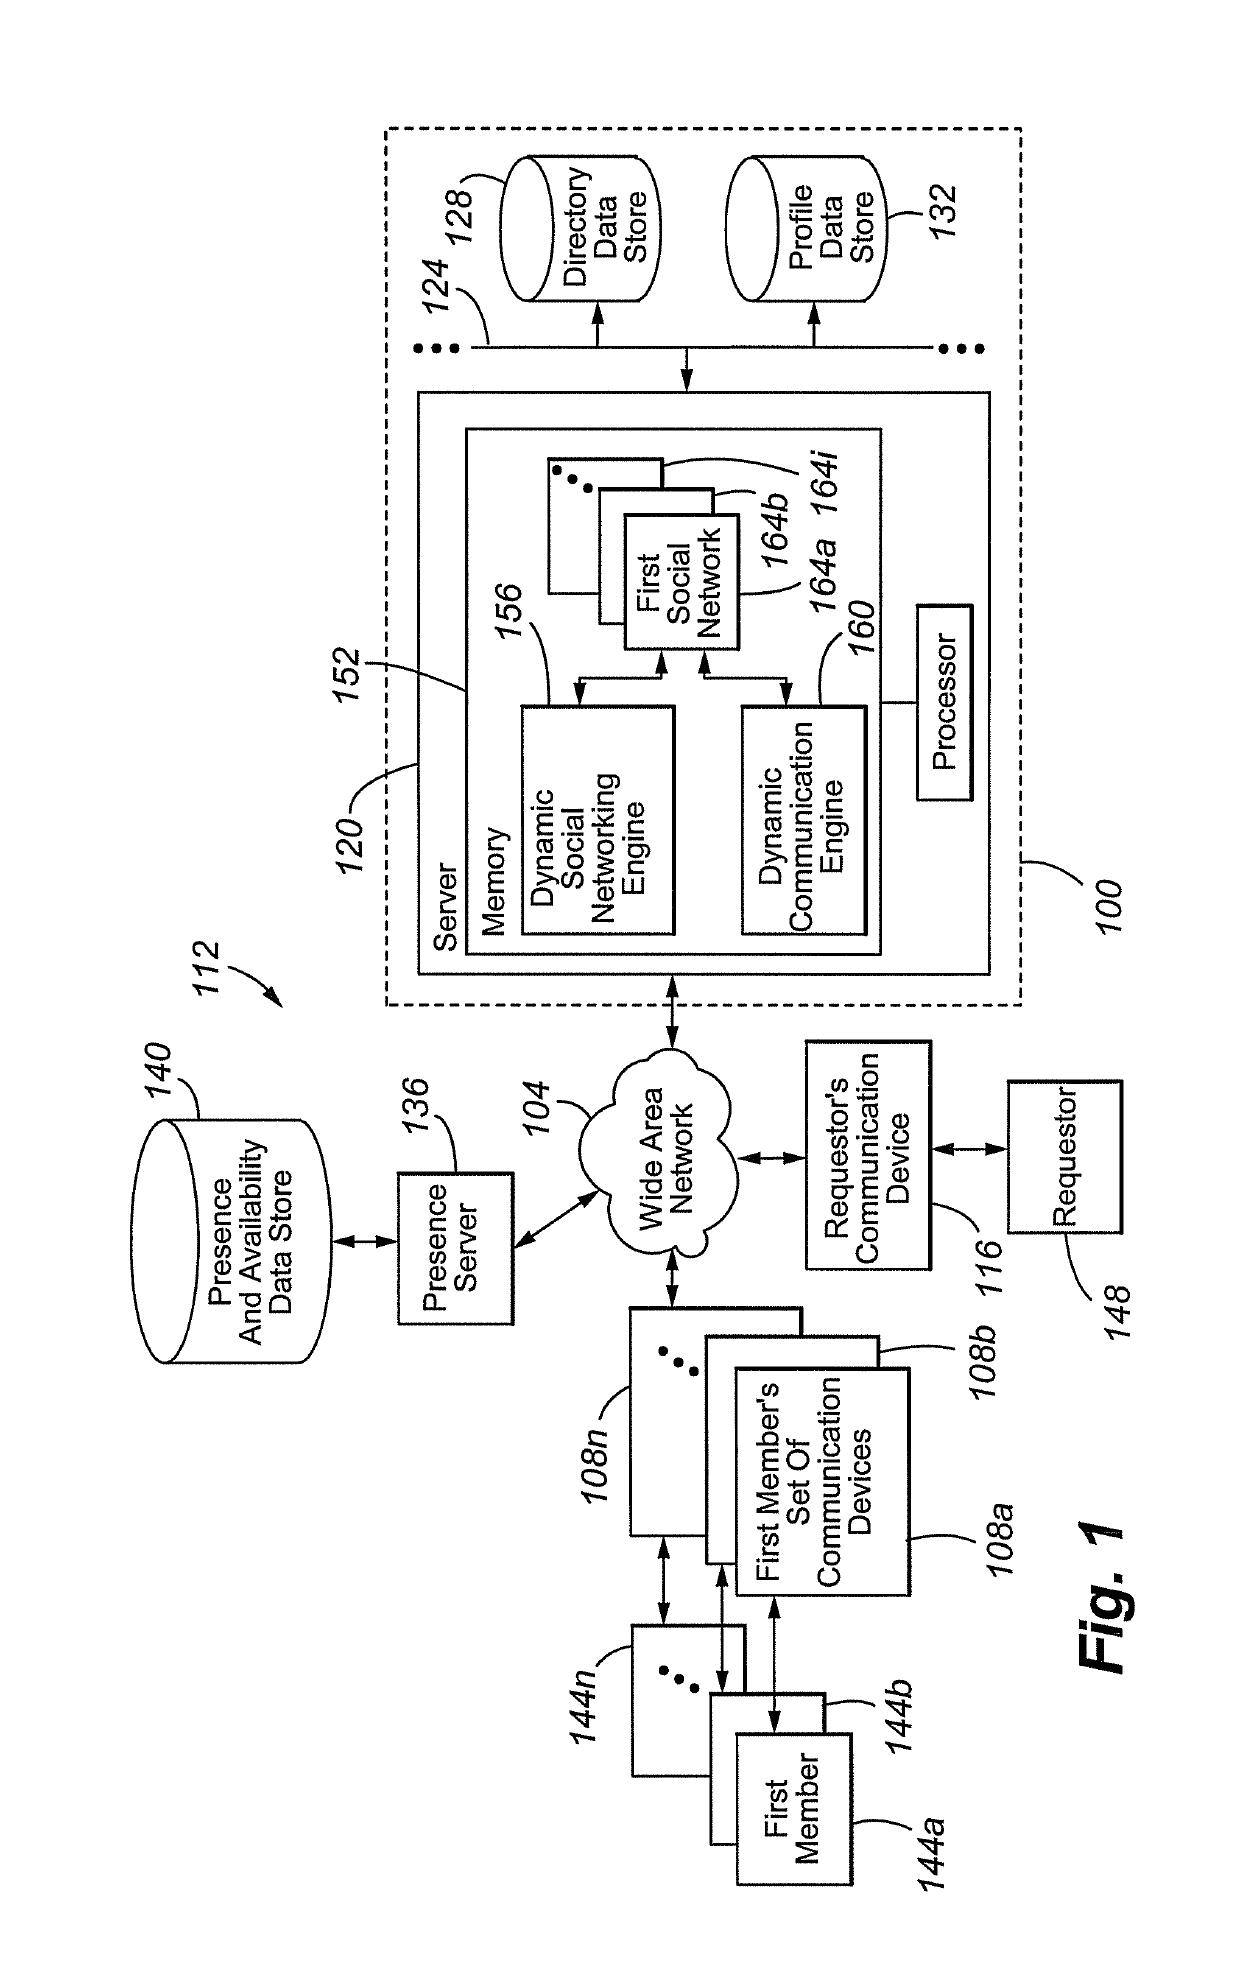 Communications-enabled dynamic social network routing utilizing presence